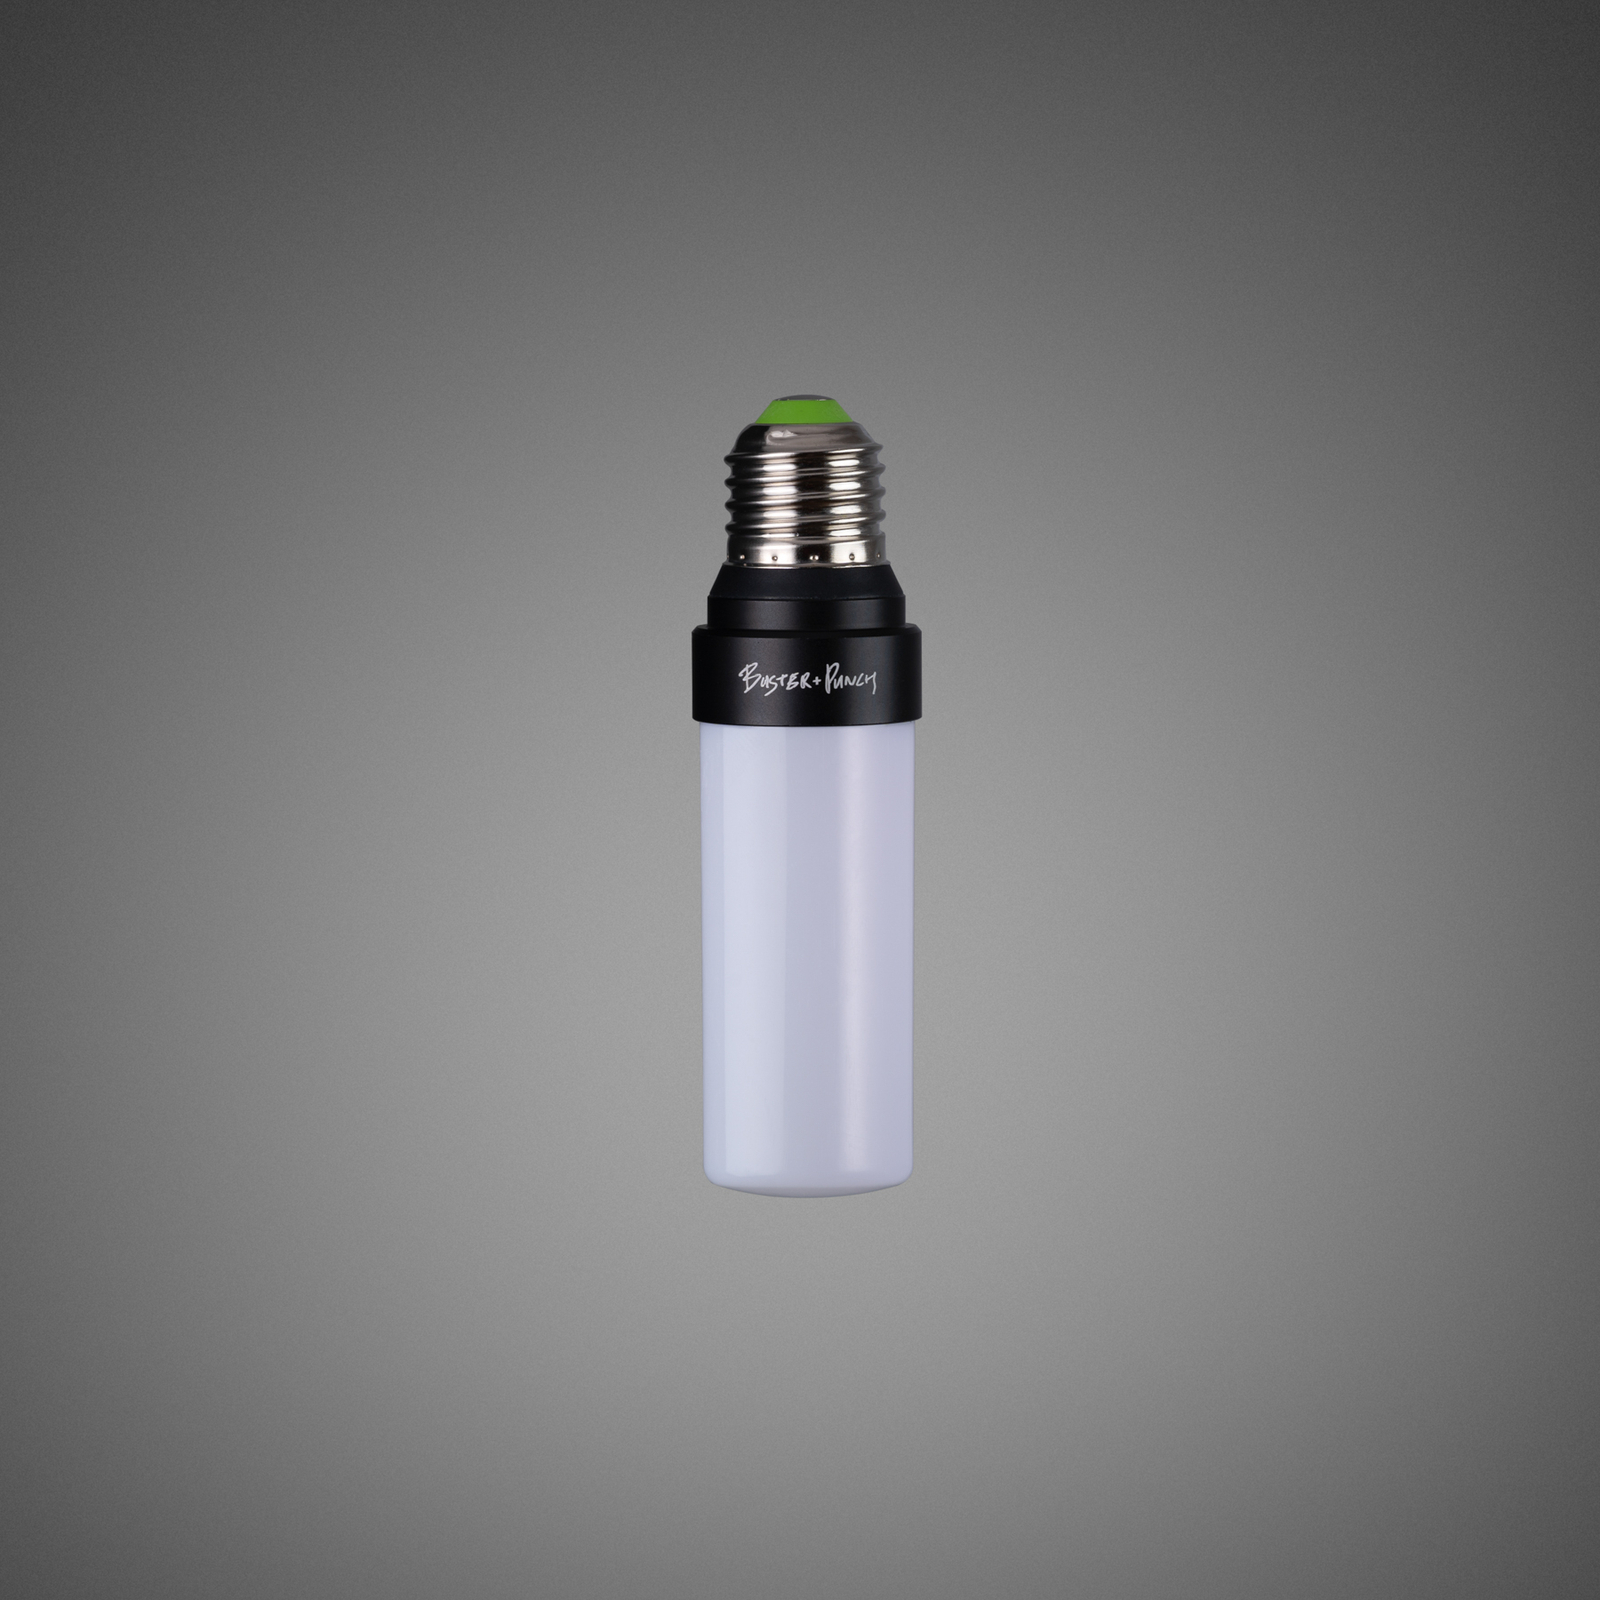 Buster + Punch LED bulb E27 5W 2,700K dimmable